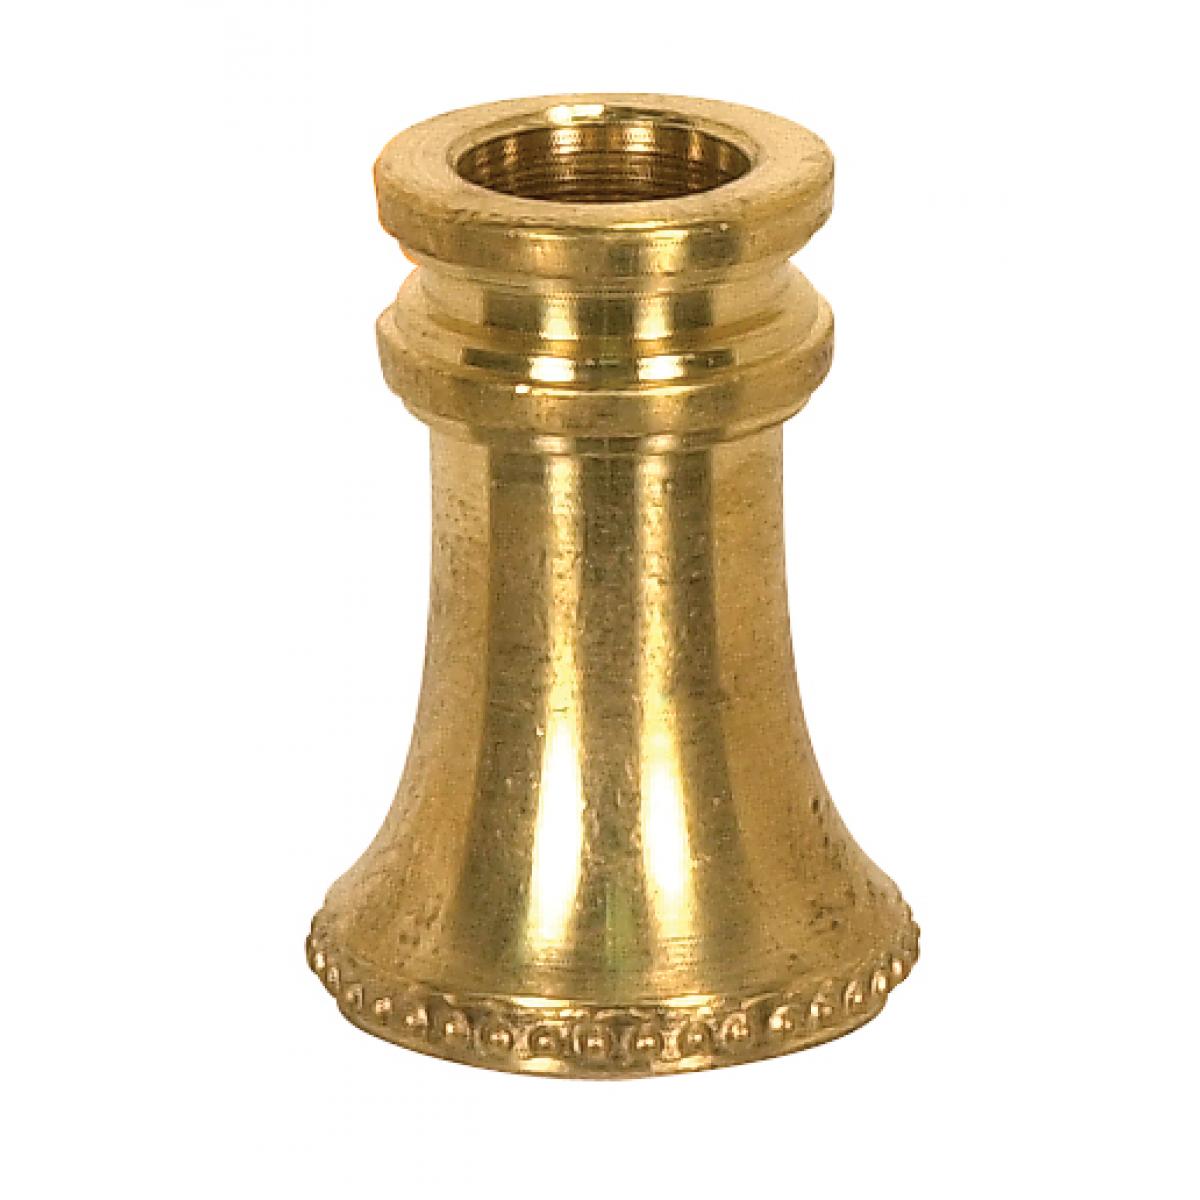 Satco 90-2169 Solid Brass Neck And Spindle Unfinished 7/8" x 1-1/4" 1/8 IP Slip